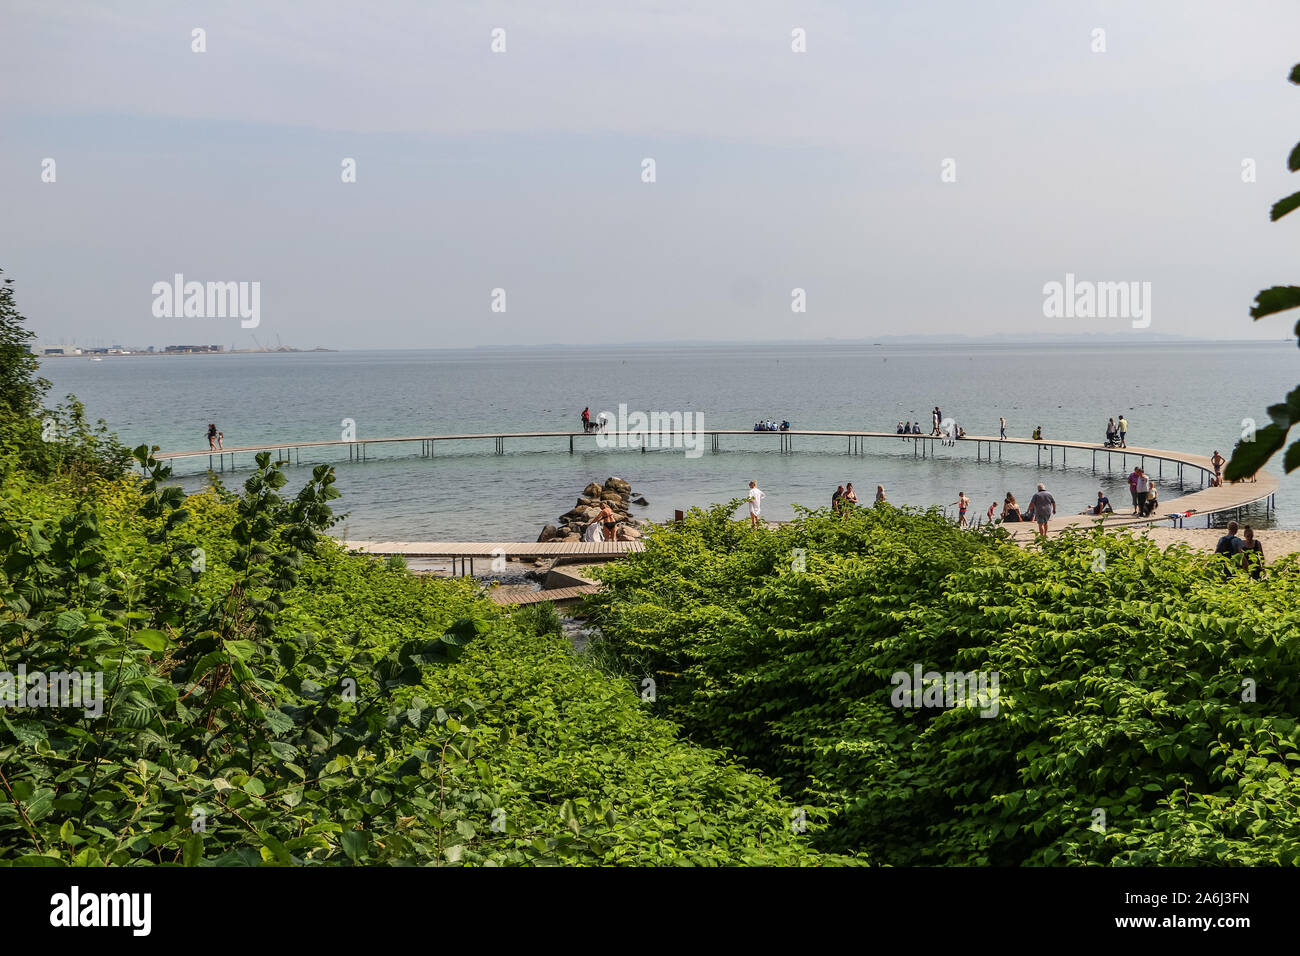 People walking by the The Infinite Bridge (Den Uendelige Bro) - circle shaped wooden pier built on a sea coast of a Aarhus Bay on a Varna Beach/Ballehage Beach, created by architect Niels Povlsgaard and Johan Gjødes  are seen in Aarhus, Denmark on 30 July 2019  © Michal Fludra / Alamy Live News Stock Photo